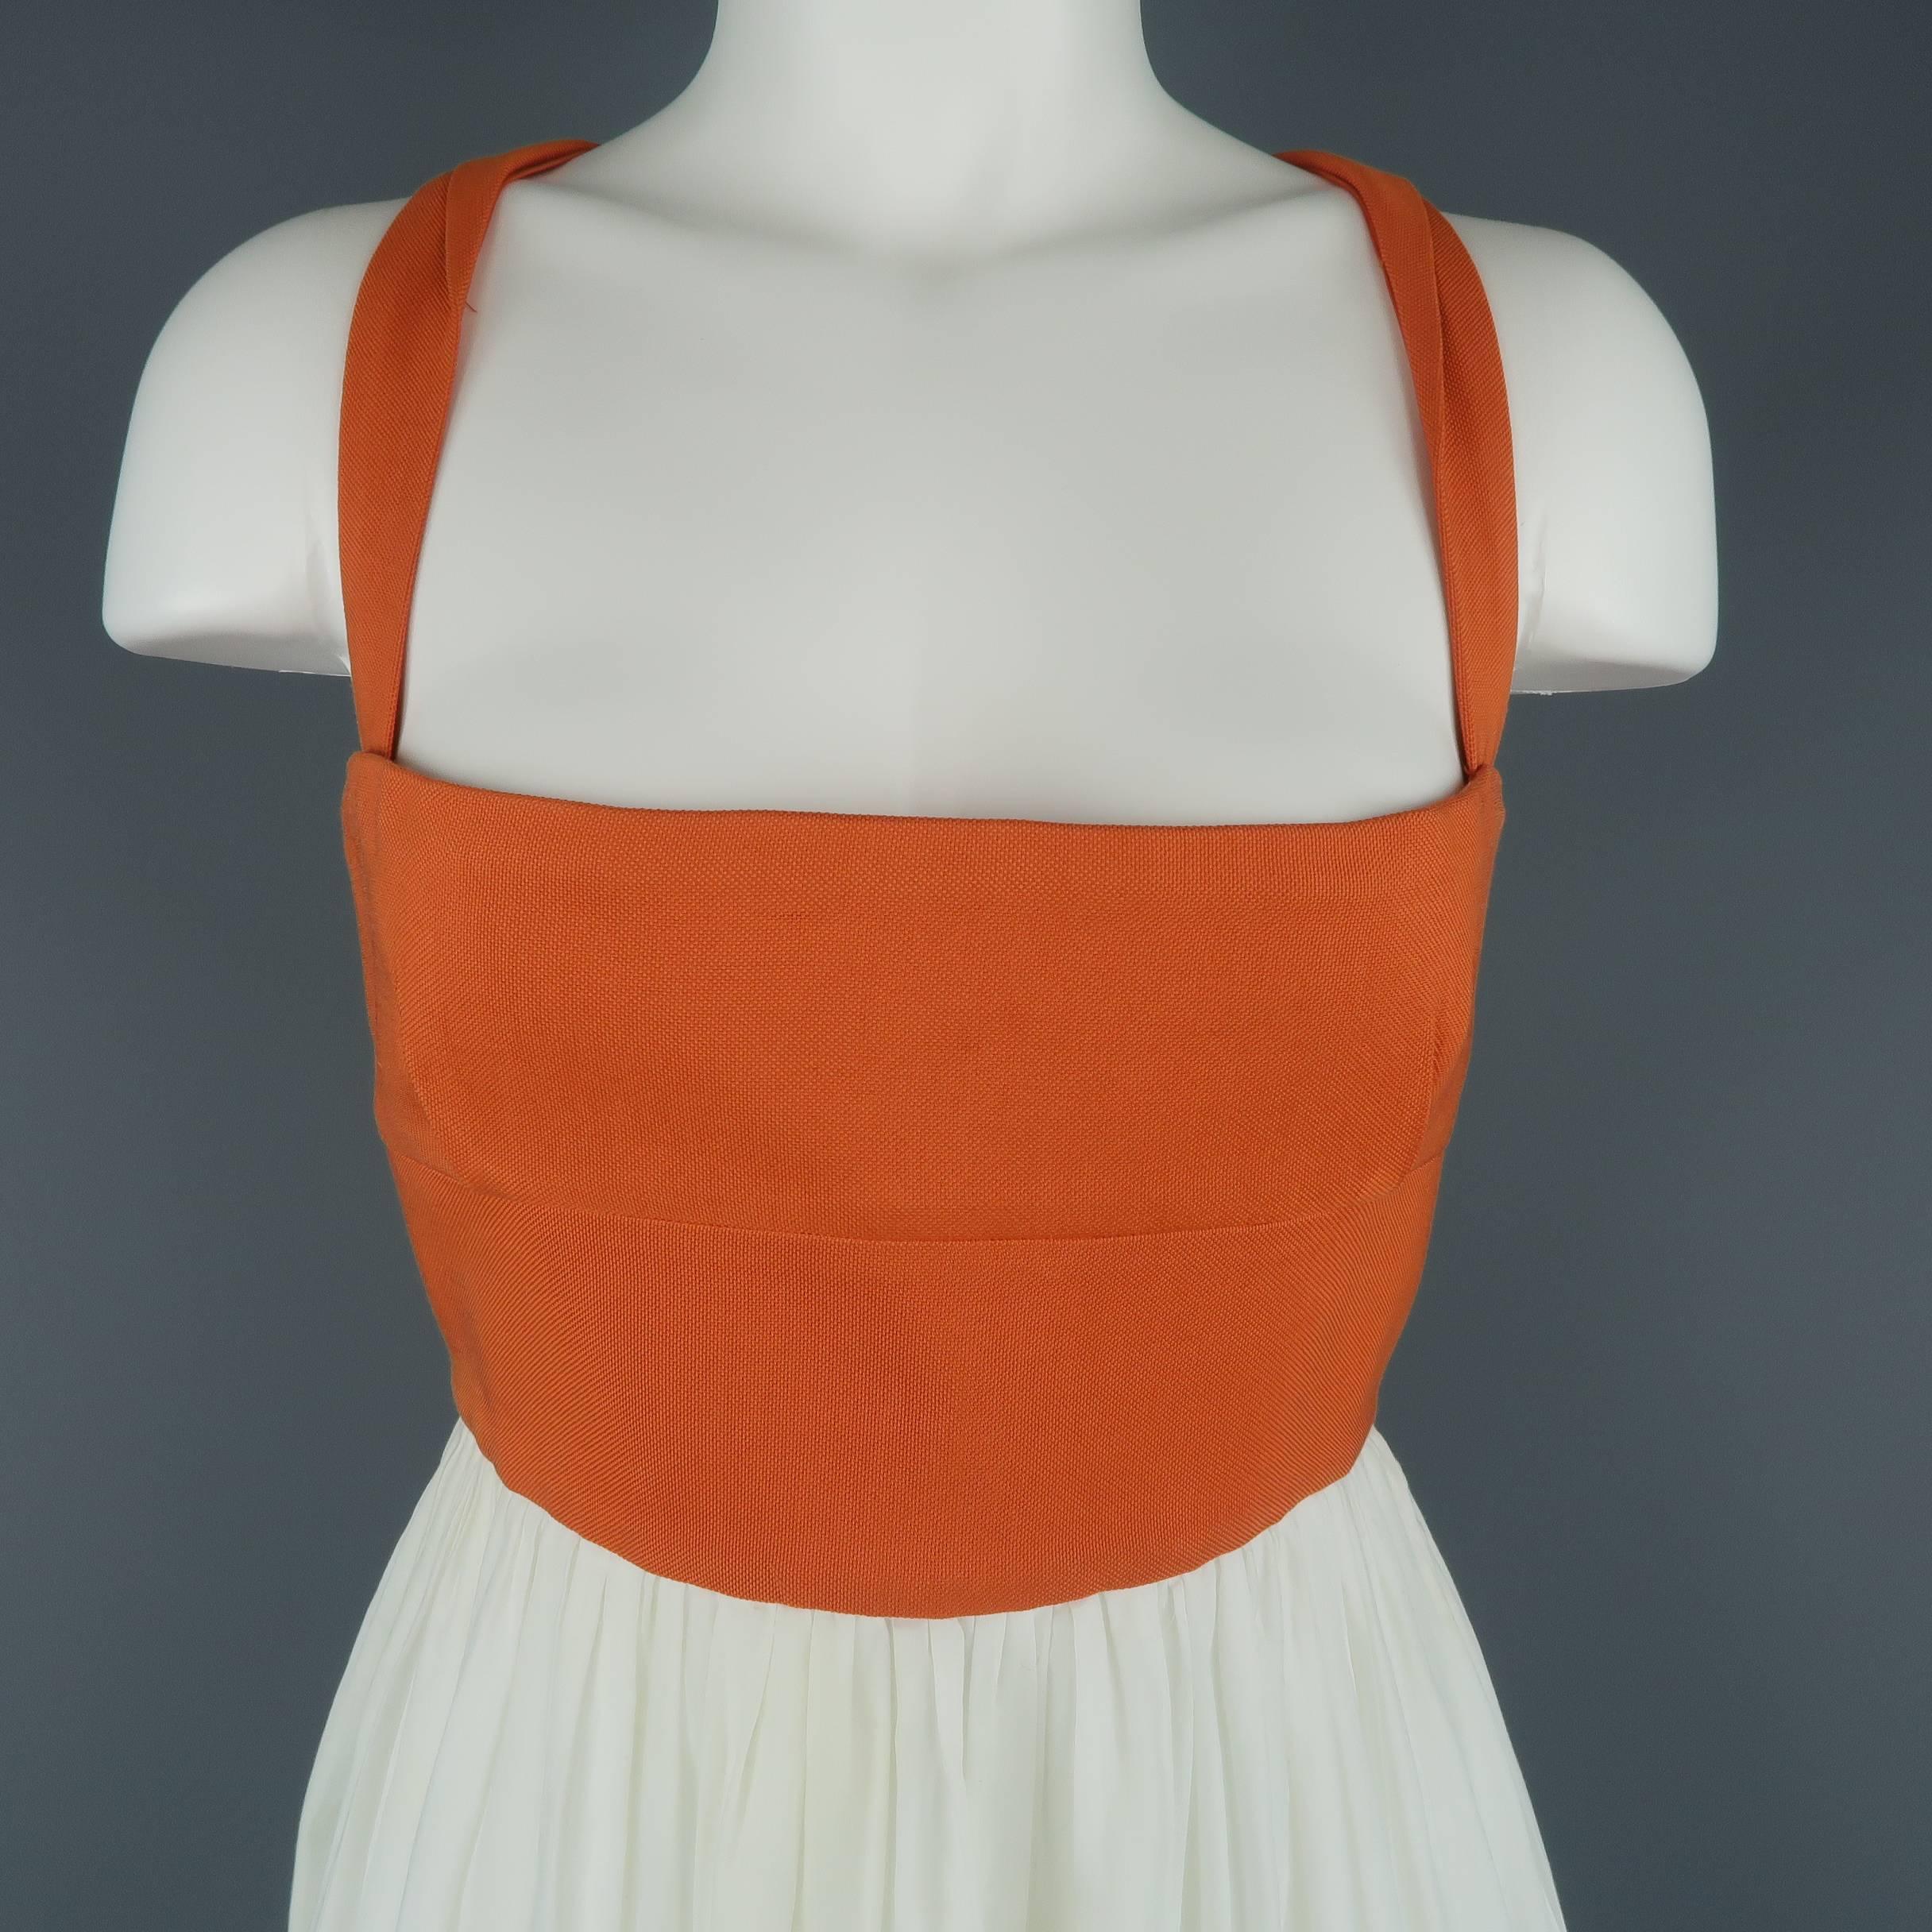 This BOTTEGA VENETA maxi dress features an orange canvas bustier top with twisted straps and hook eye back closure with a cream gathered A line skirt. Minor wear. Made in Italy.
 
Good Pre-Owned Condition.
Marked: IT 44
 
Measurements:
 
Bust: 34